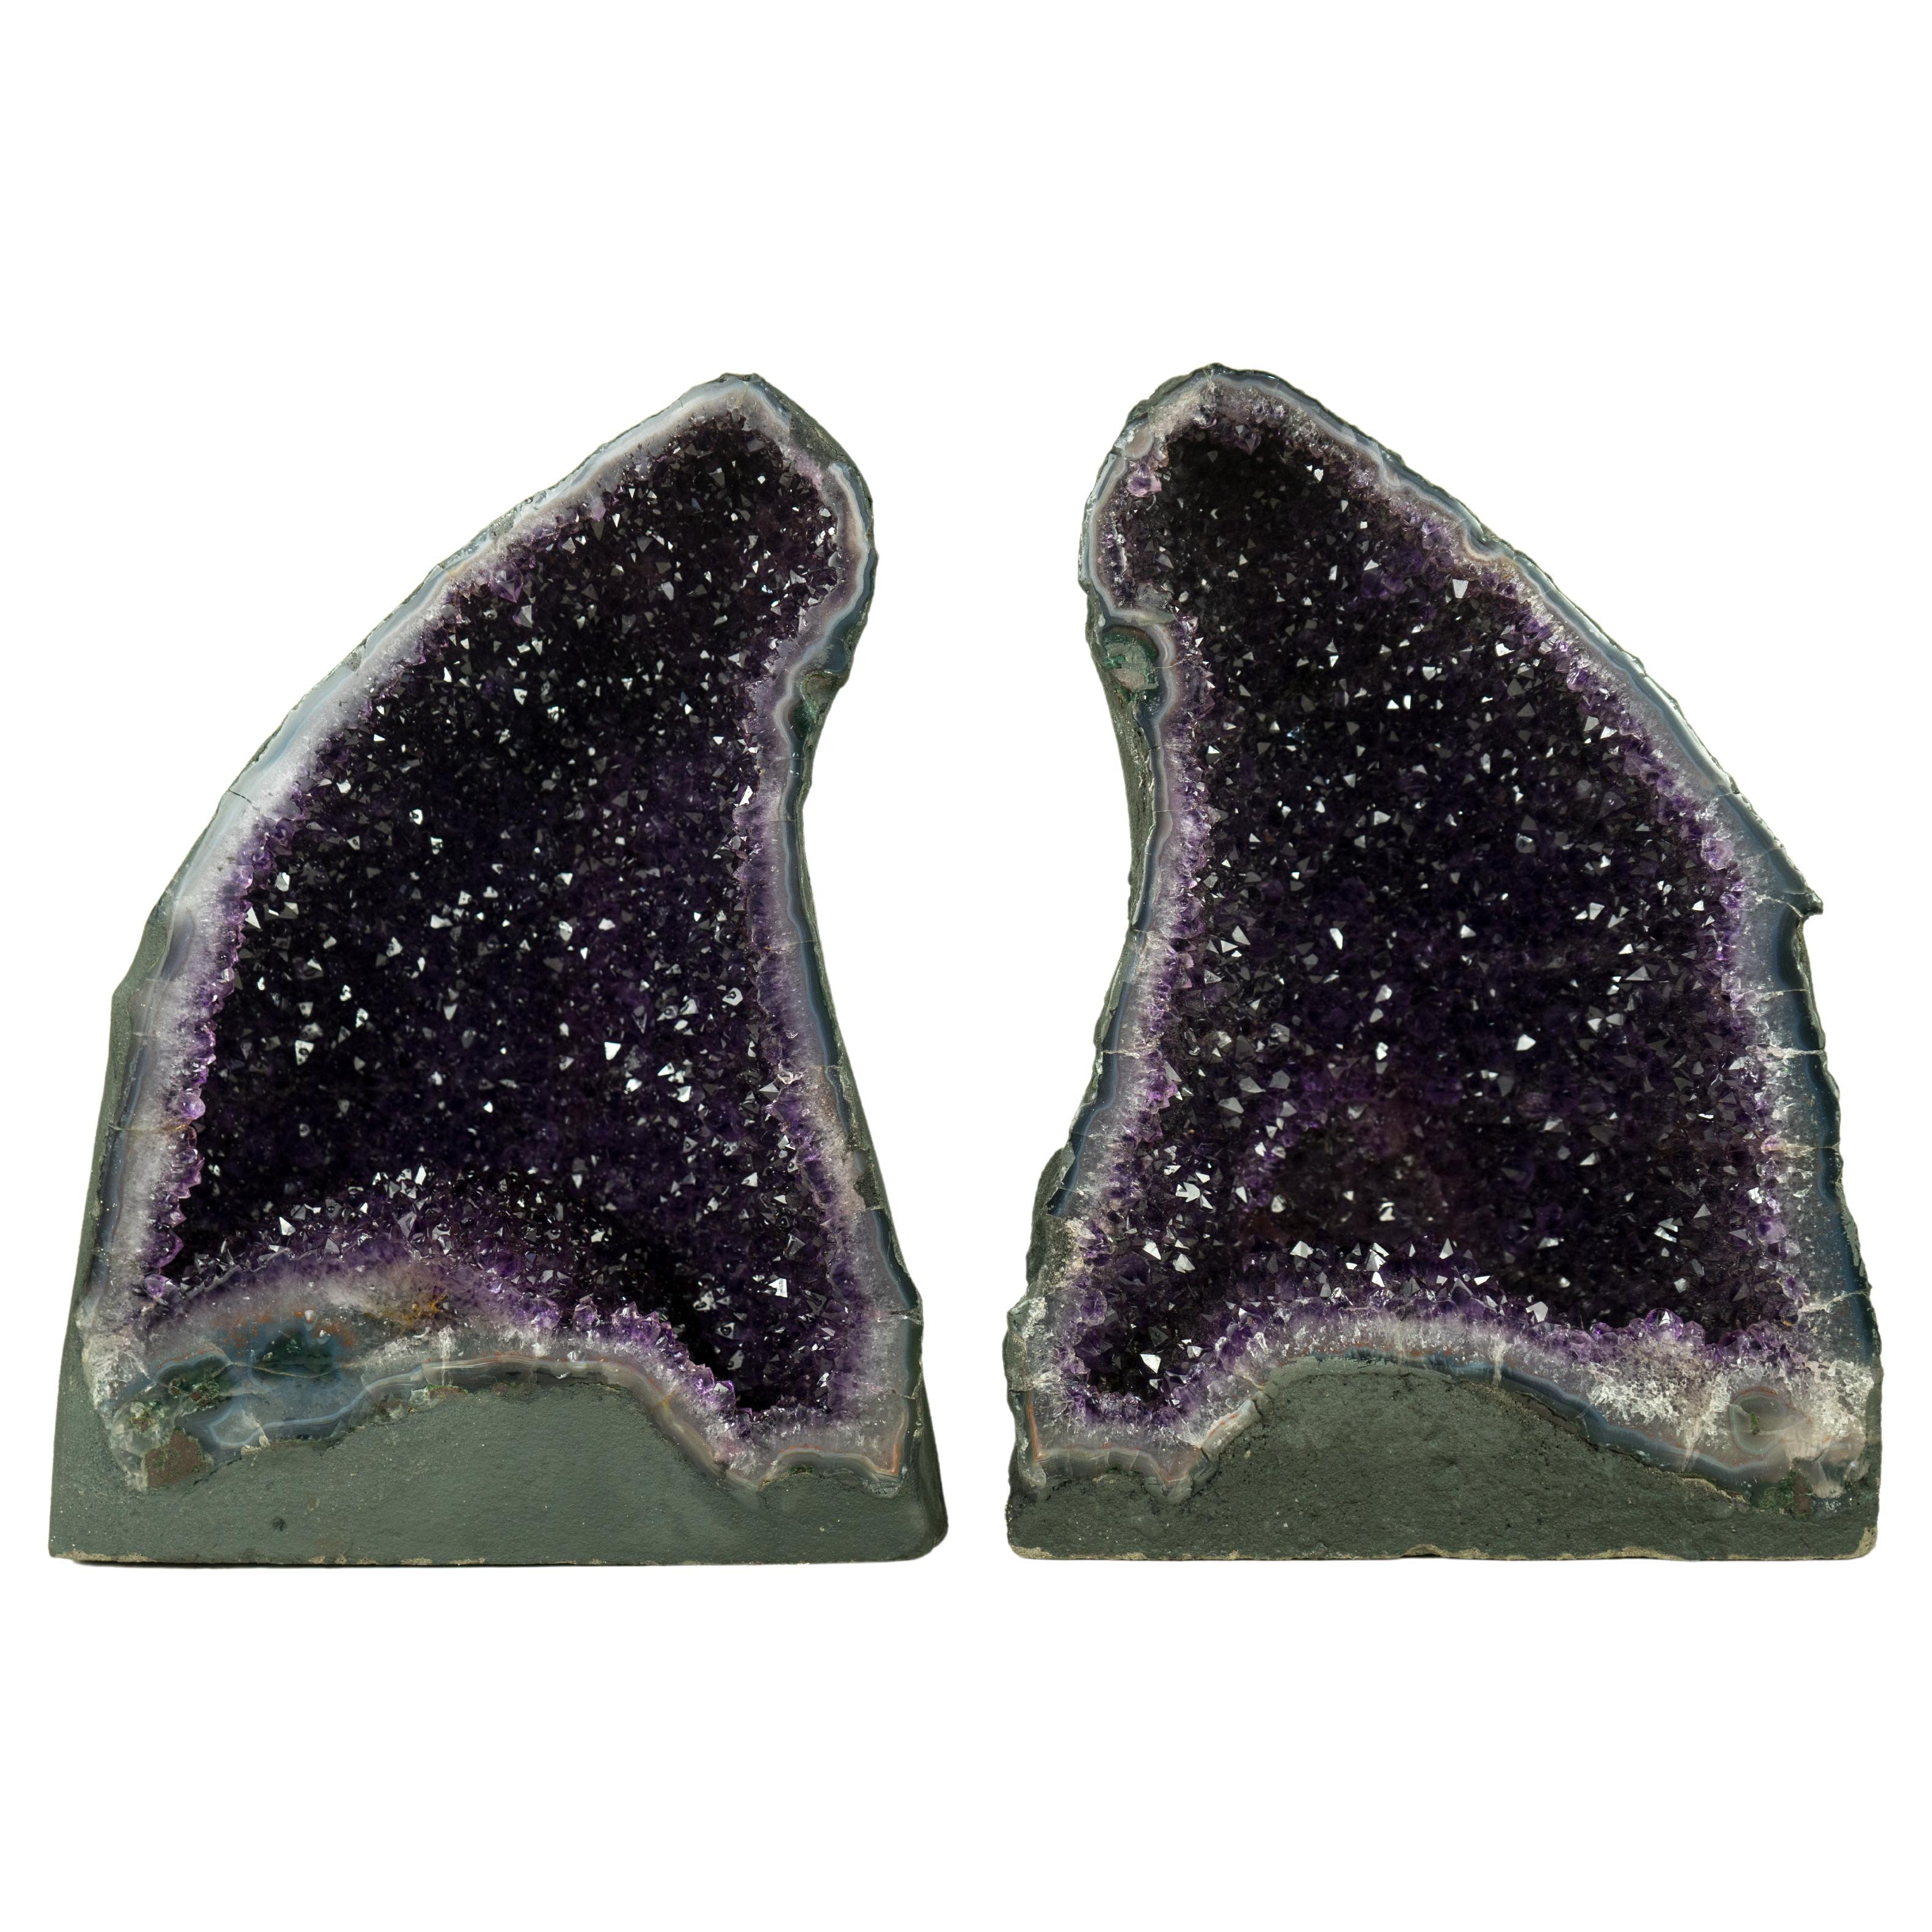 Pair of All-Natural Amethyst Geodes: Intense Purple Amethyst with Galaxy Druzy